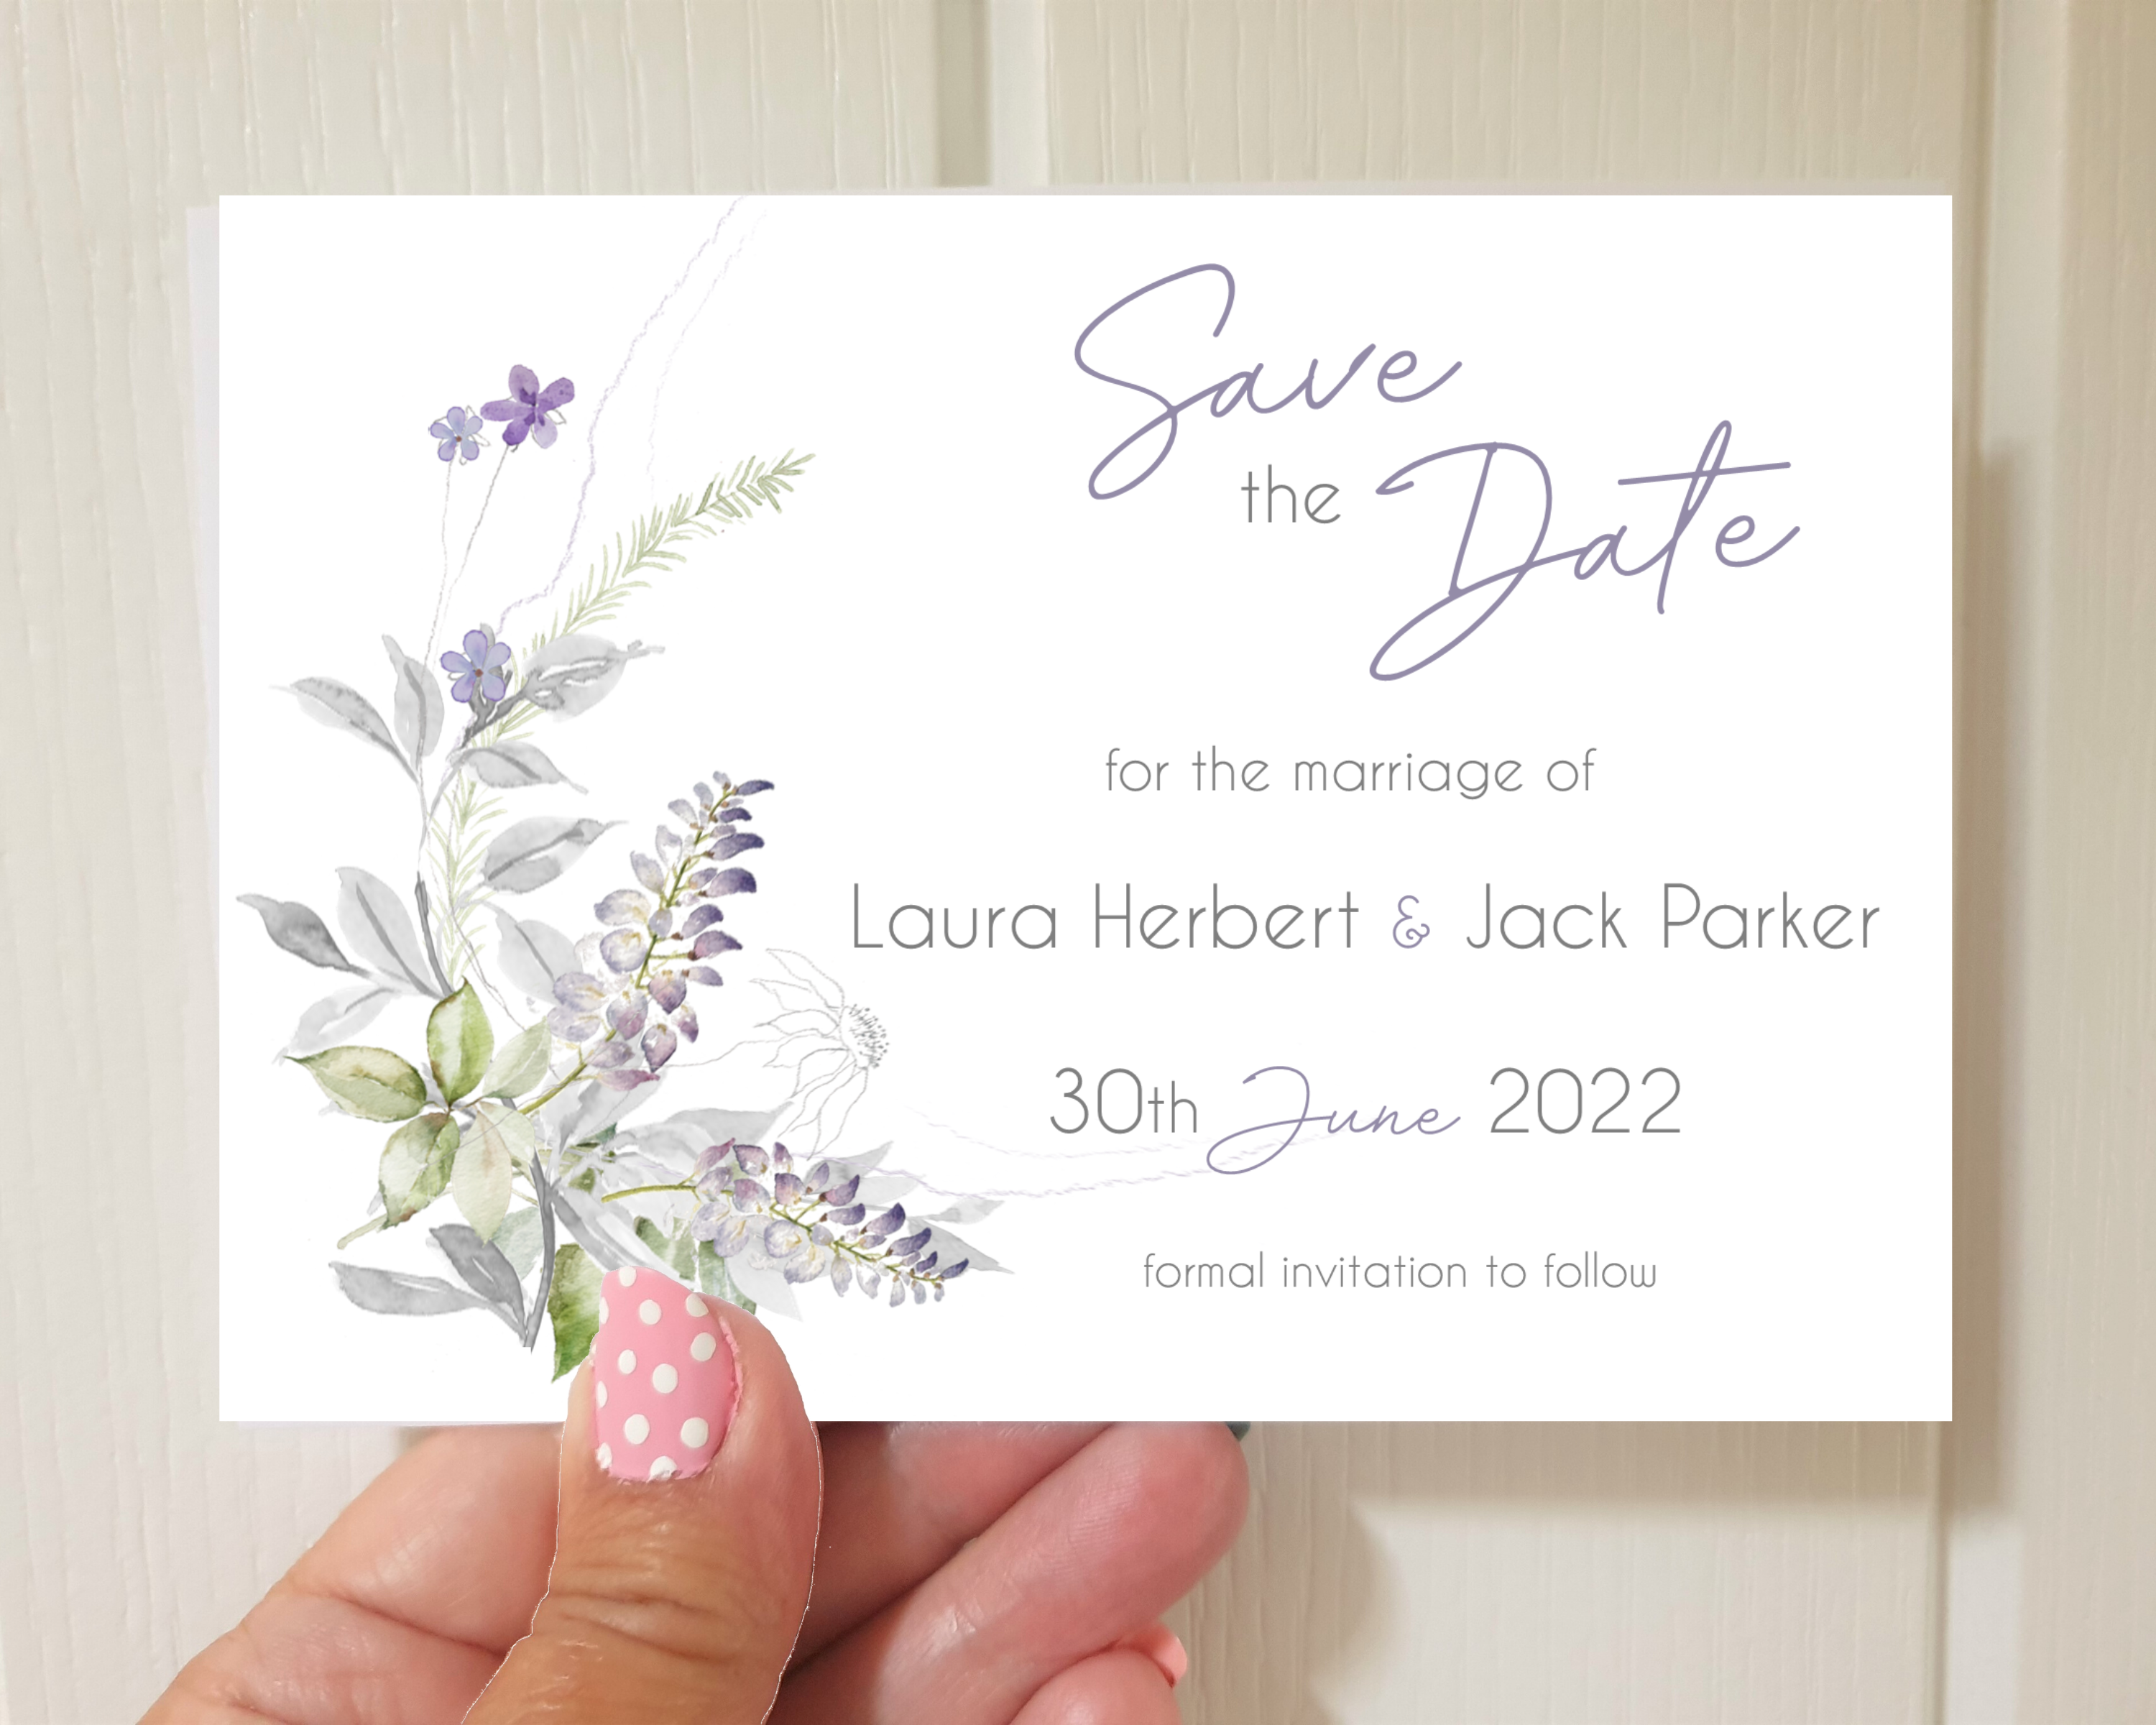 Muted lavender & greenery Poppleberry A6 wedding save the date card, held to show size.